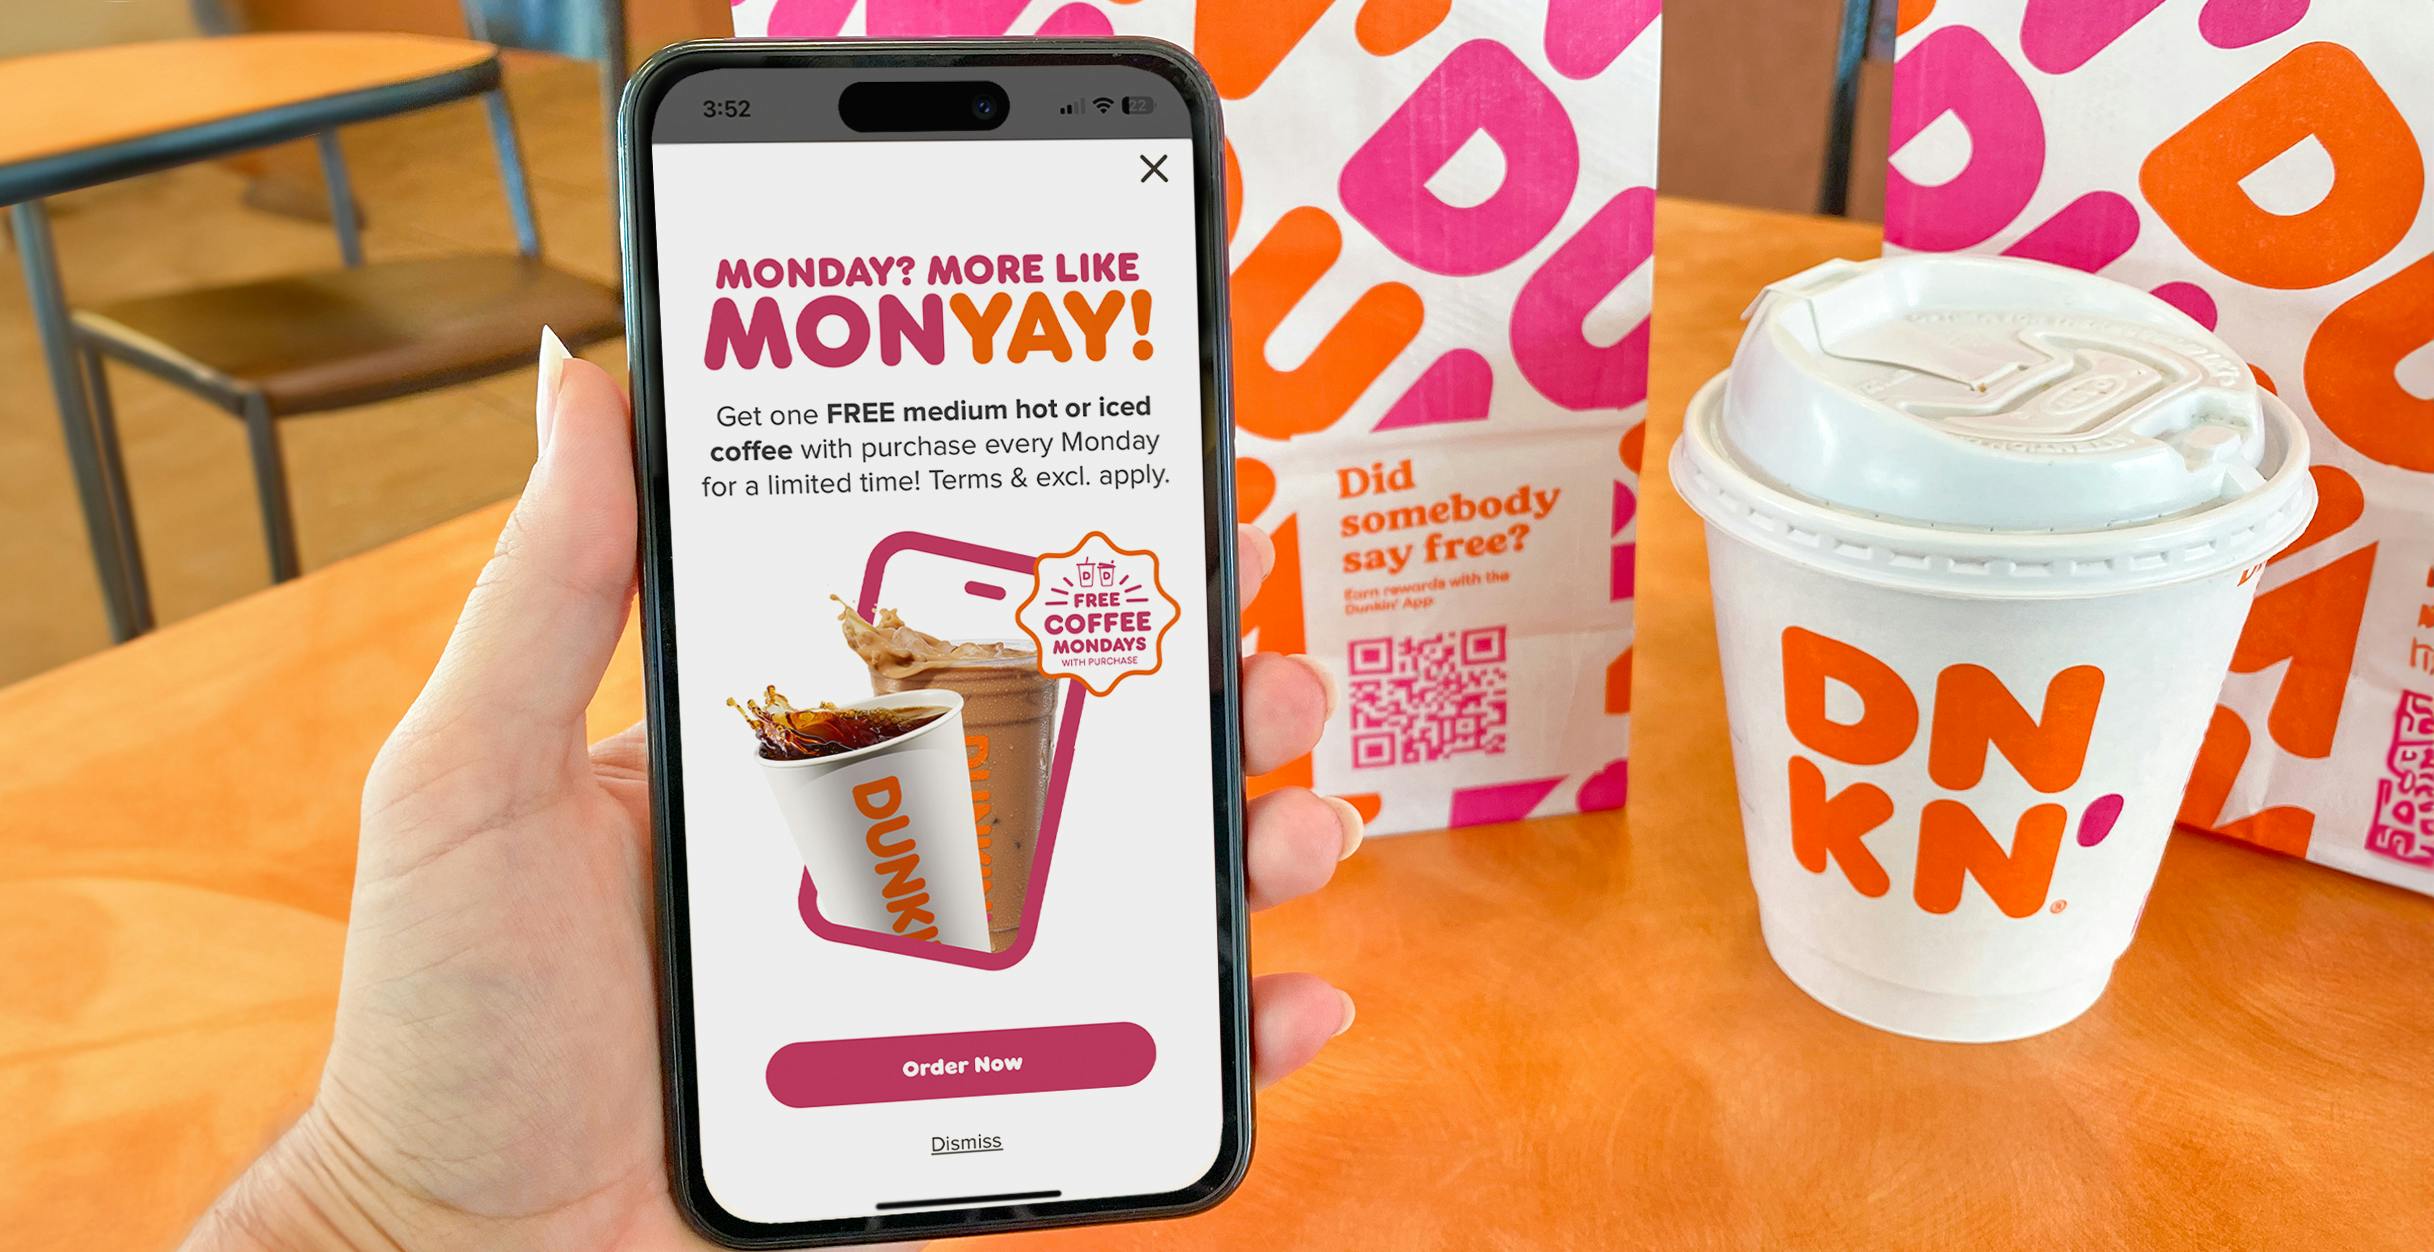 dunkin-free-coffee-coupons-free-coffee-mondays-are-back-in-sept